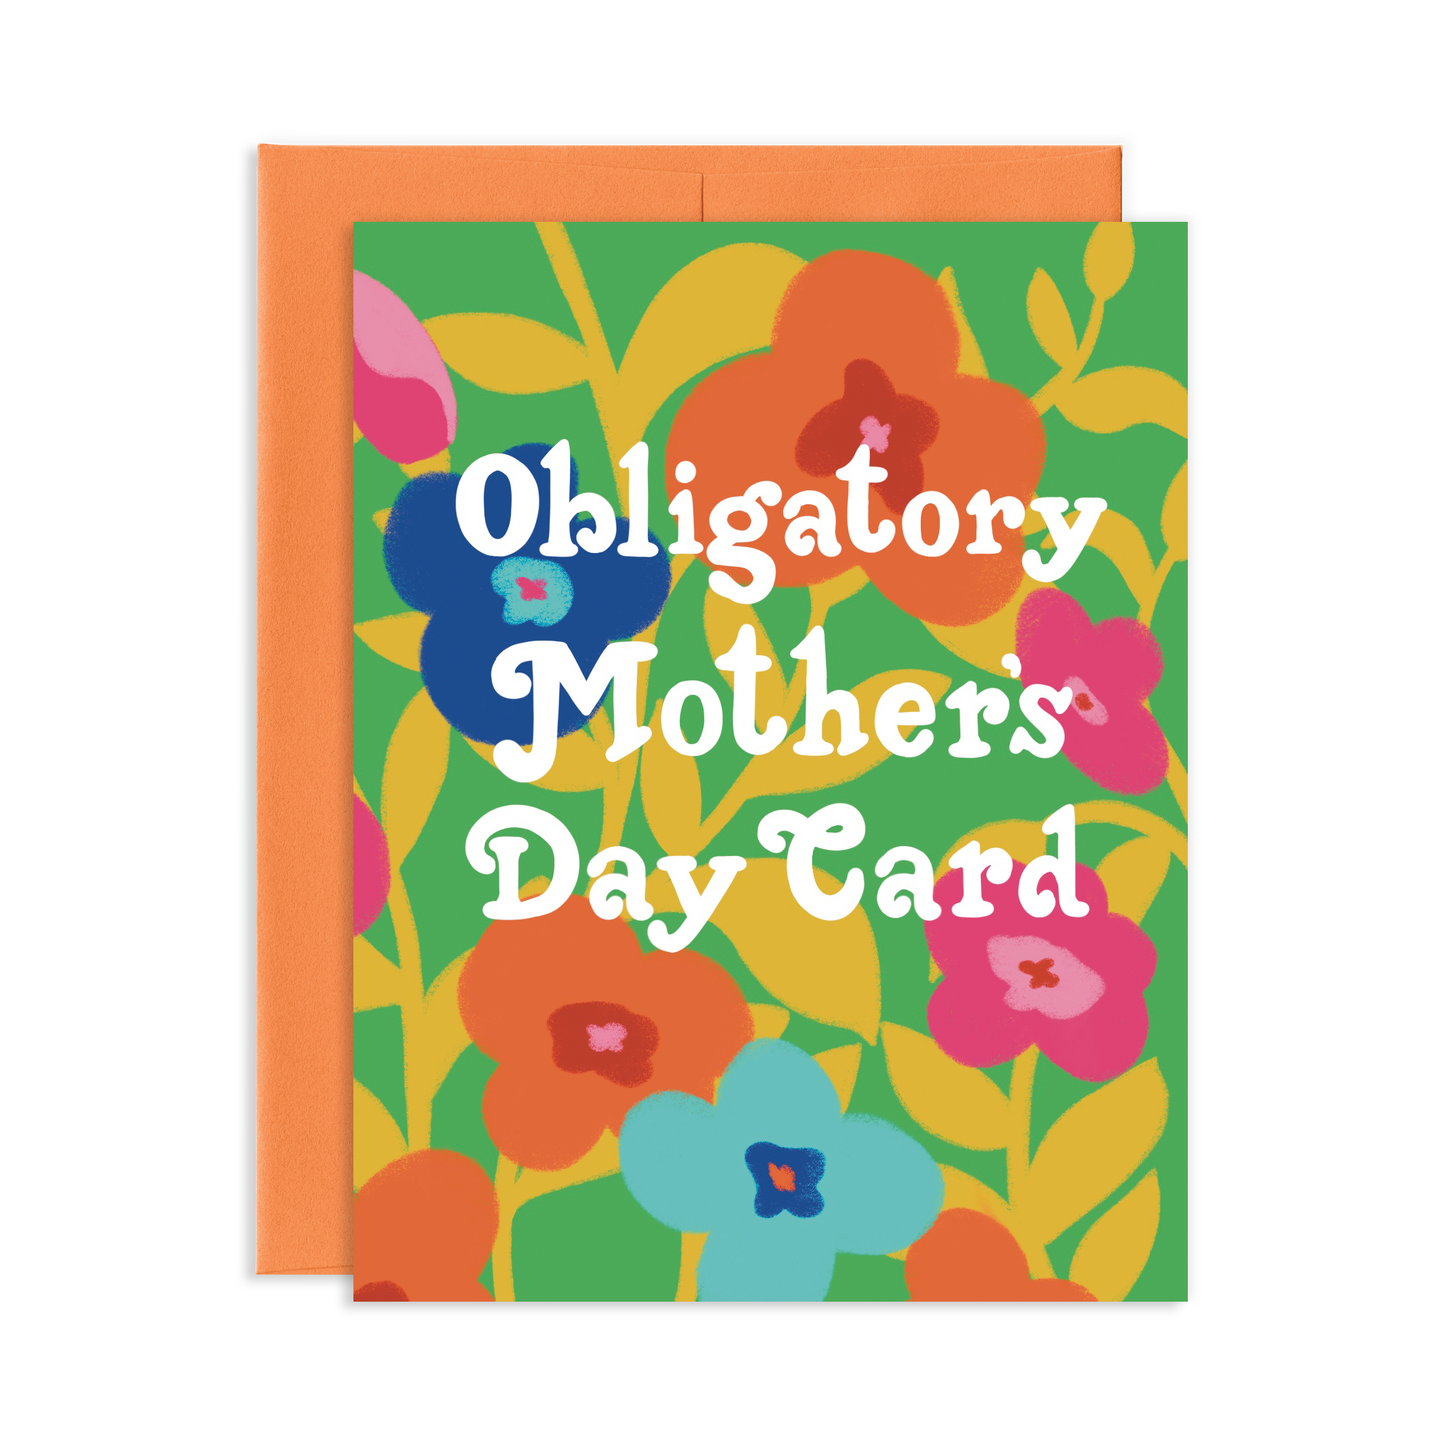 Obligatory Mother's Day Greeting Card